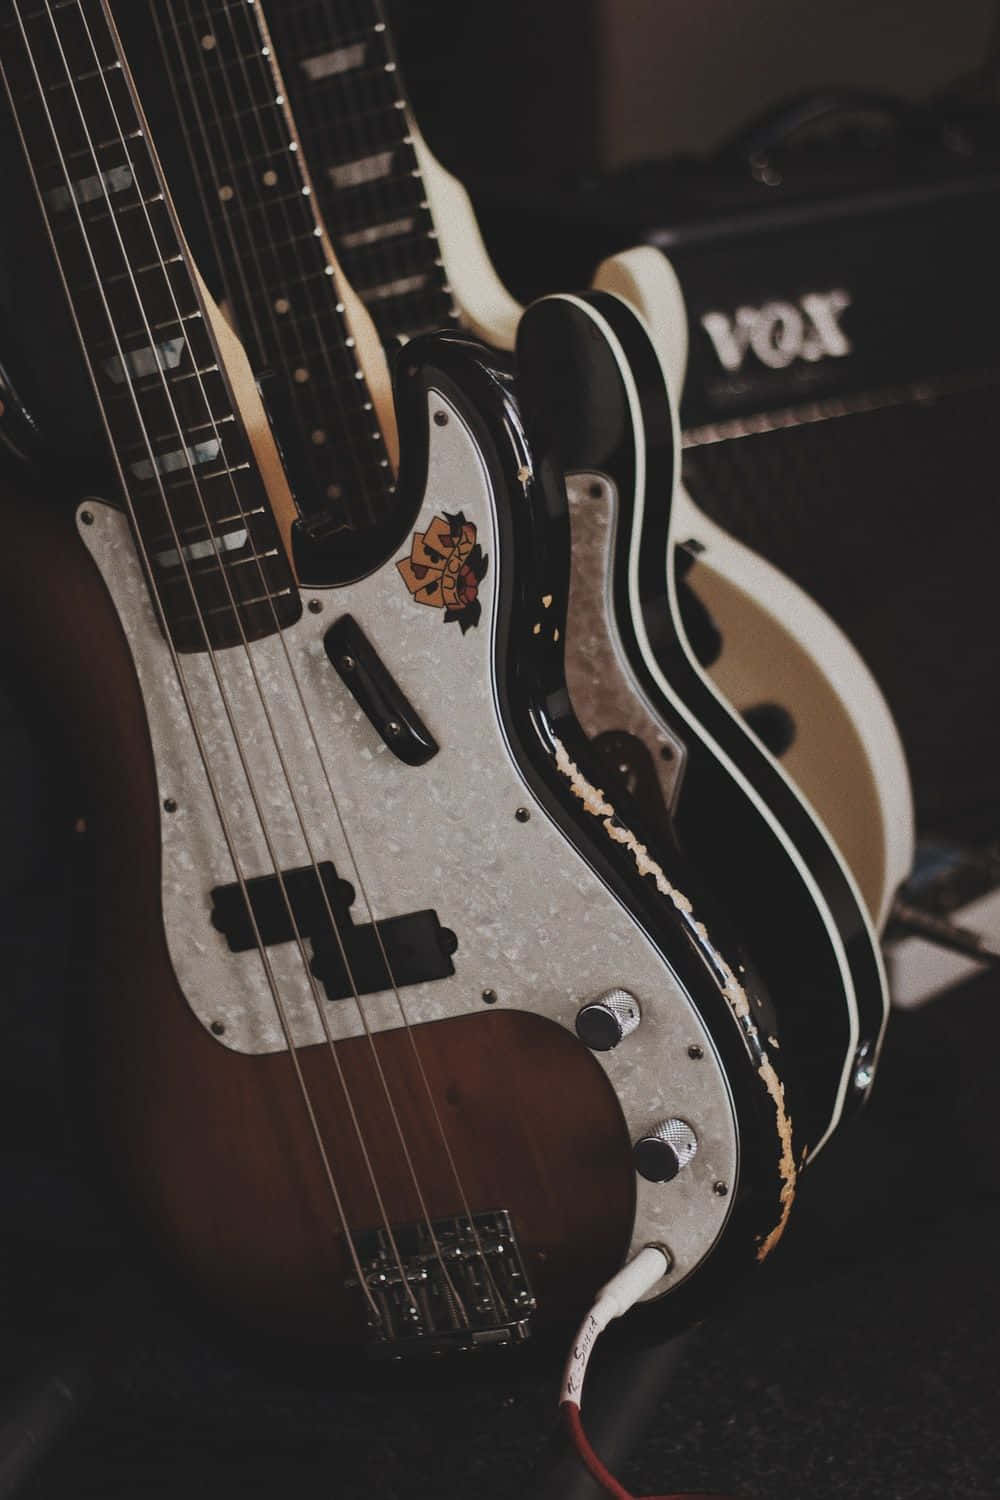 A close up of two bass guitars in front of a Vox amplifier. - Guitar